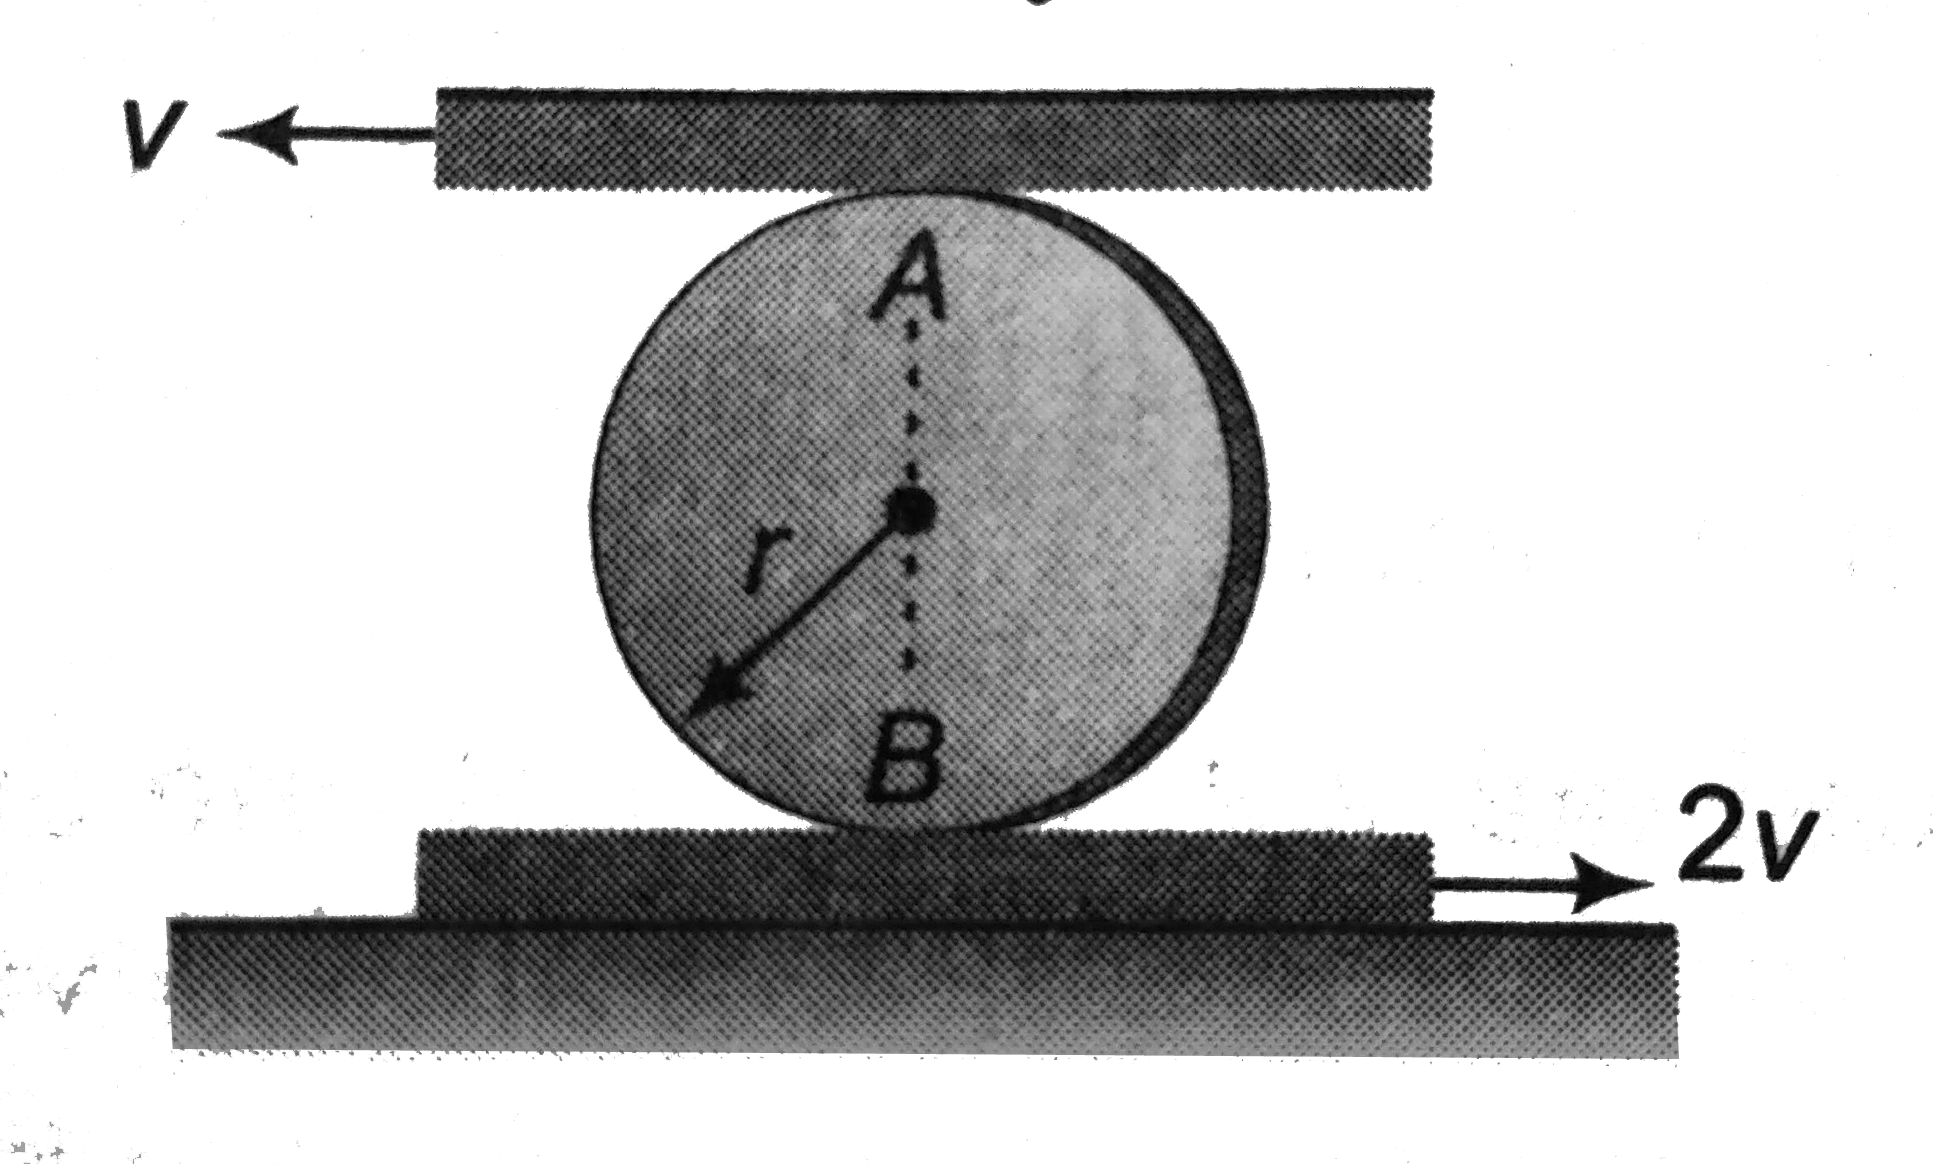 the disc of the radius r is confined to roll without slipping at  A and B if the plates have the velocities shown, determine the angular velocity of the disc.